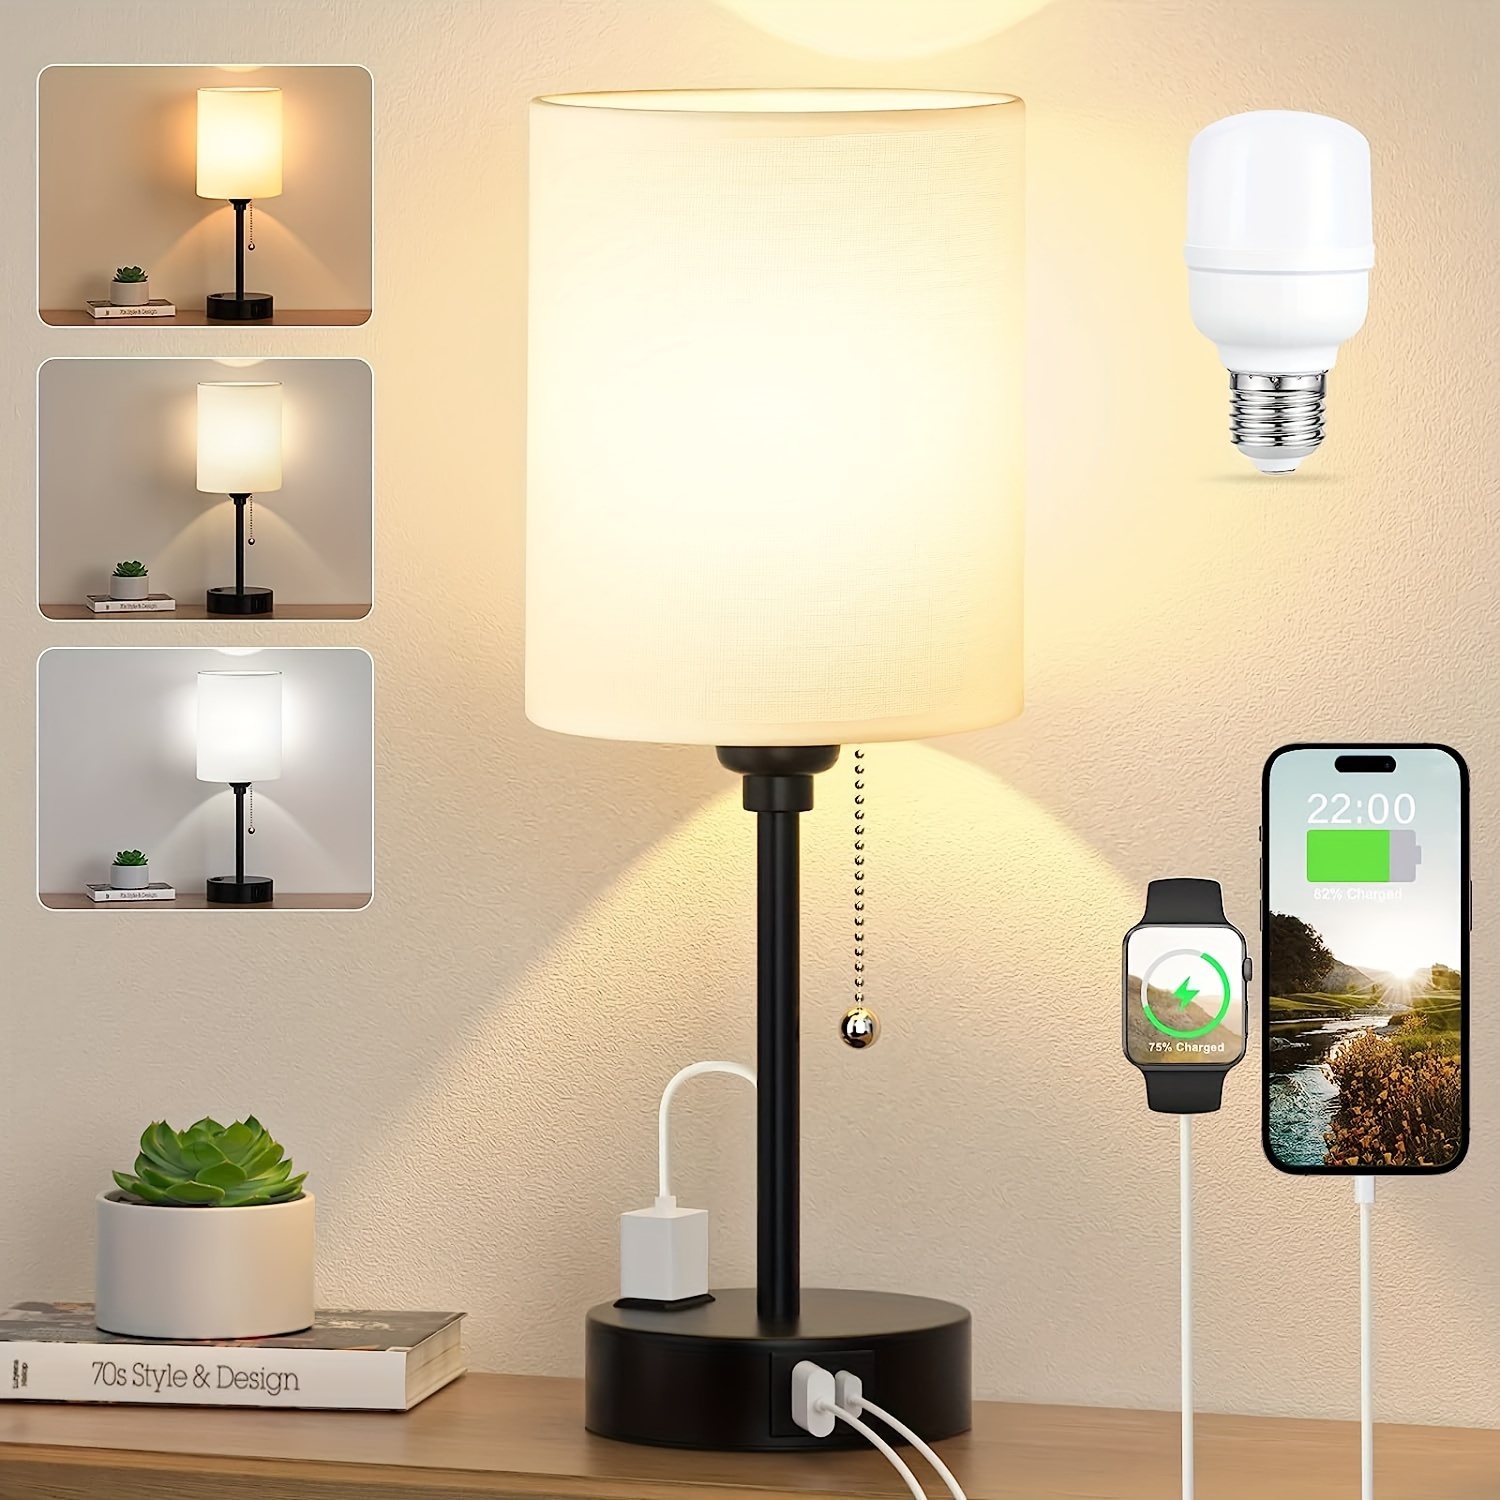 

Bedside Lamp For Bedroom Nightstand - Small Table Lamp With Usb A + C Charging Port, 3 Color Temperatures Pull Chain Night Stand Light With Bulb, Side Table Desk Reading Lamp For Living Room For Hotel